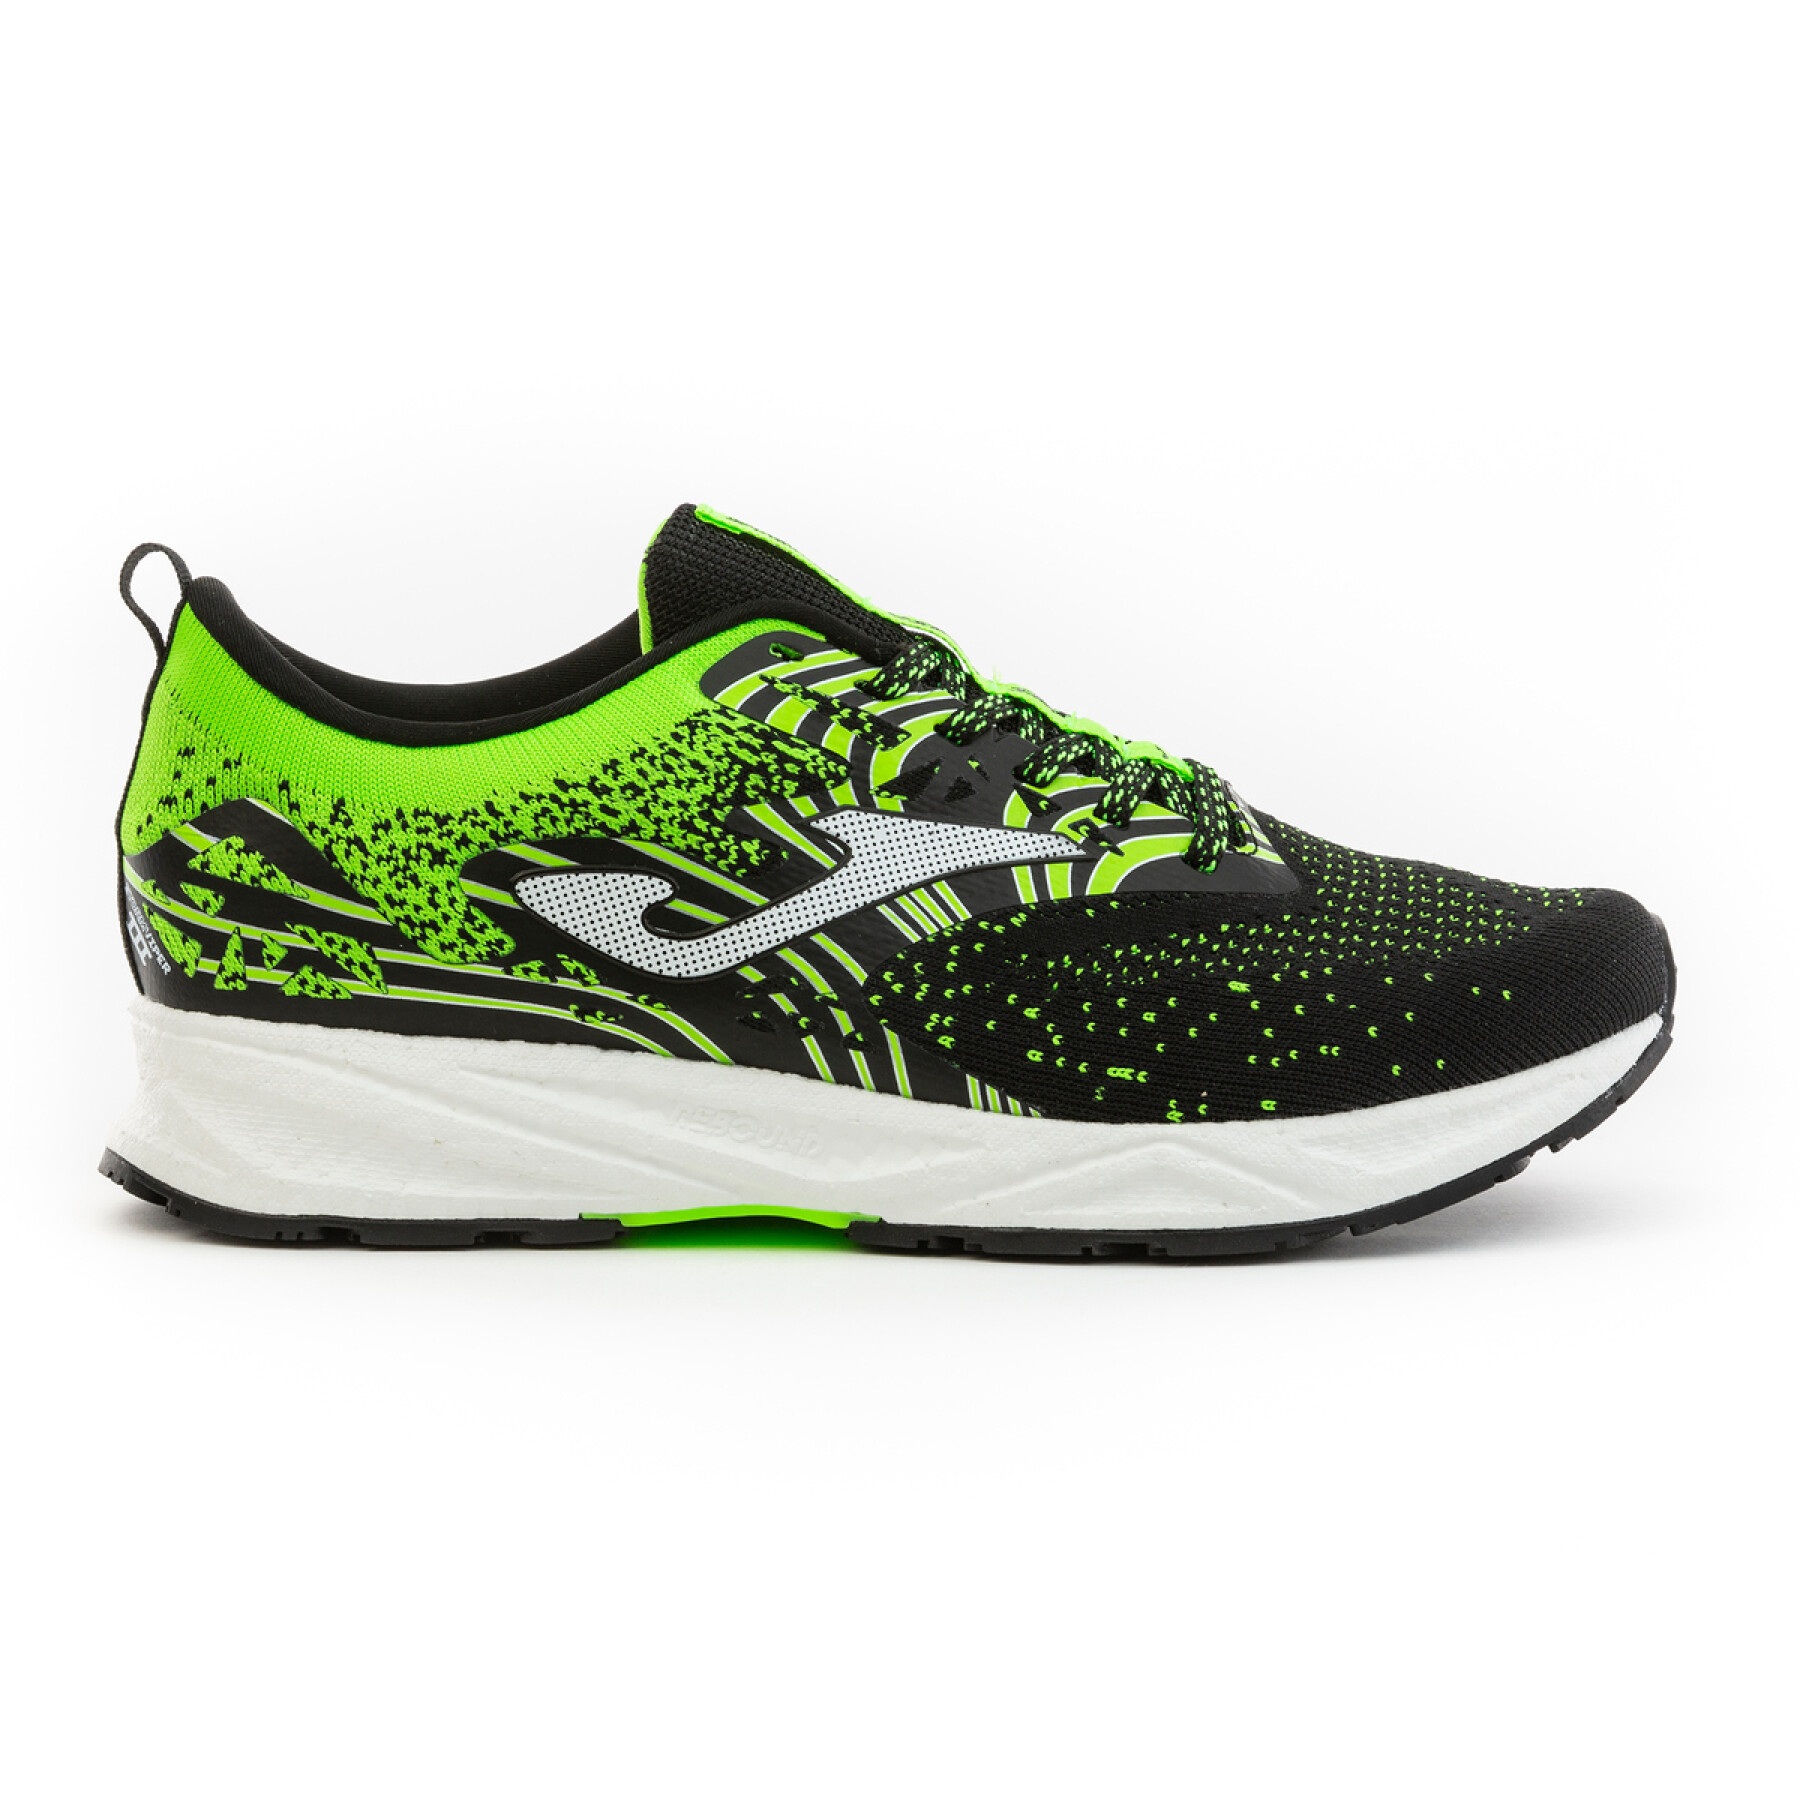 Chaussures Joma Storm Viper R 2001 LIMON